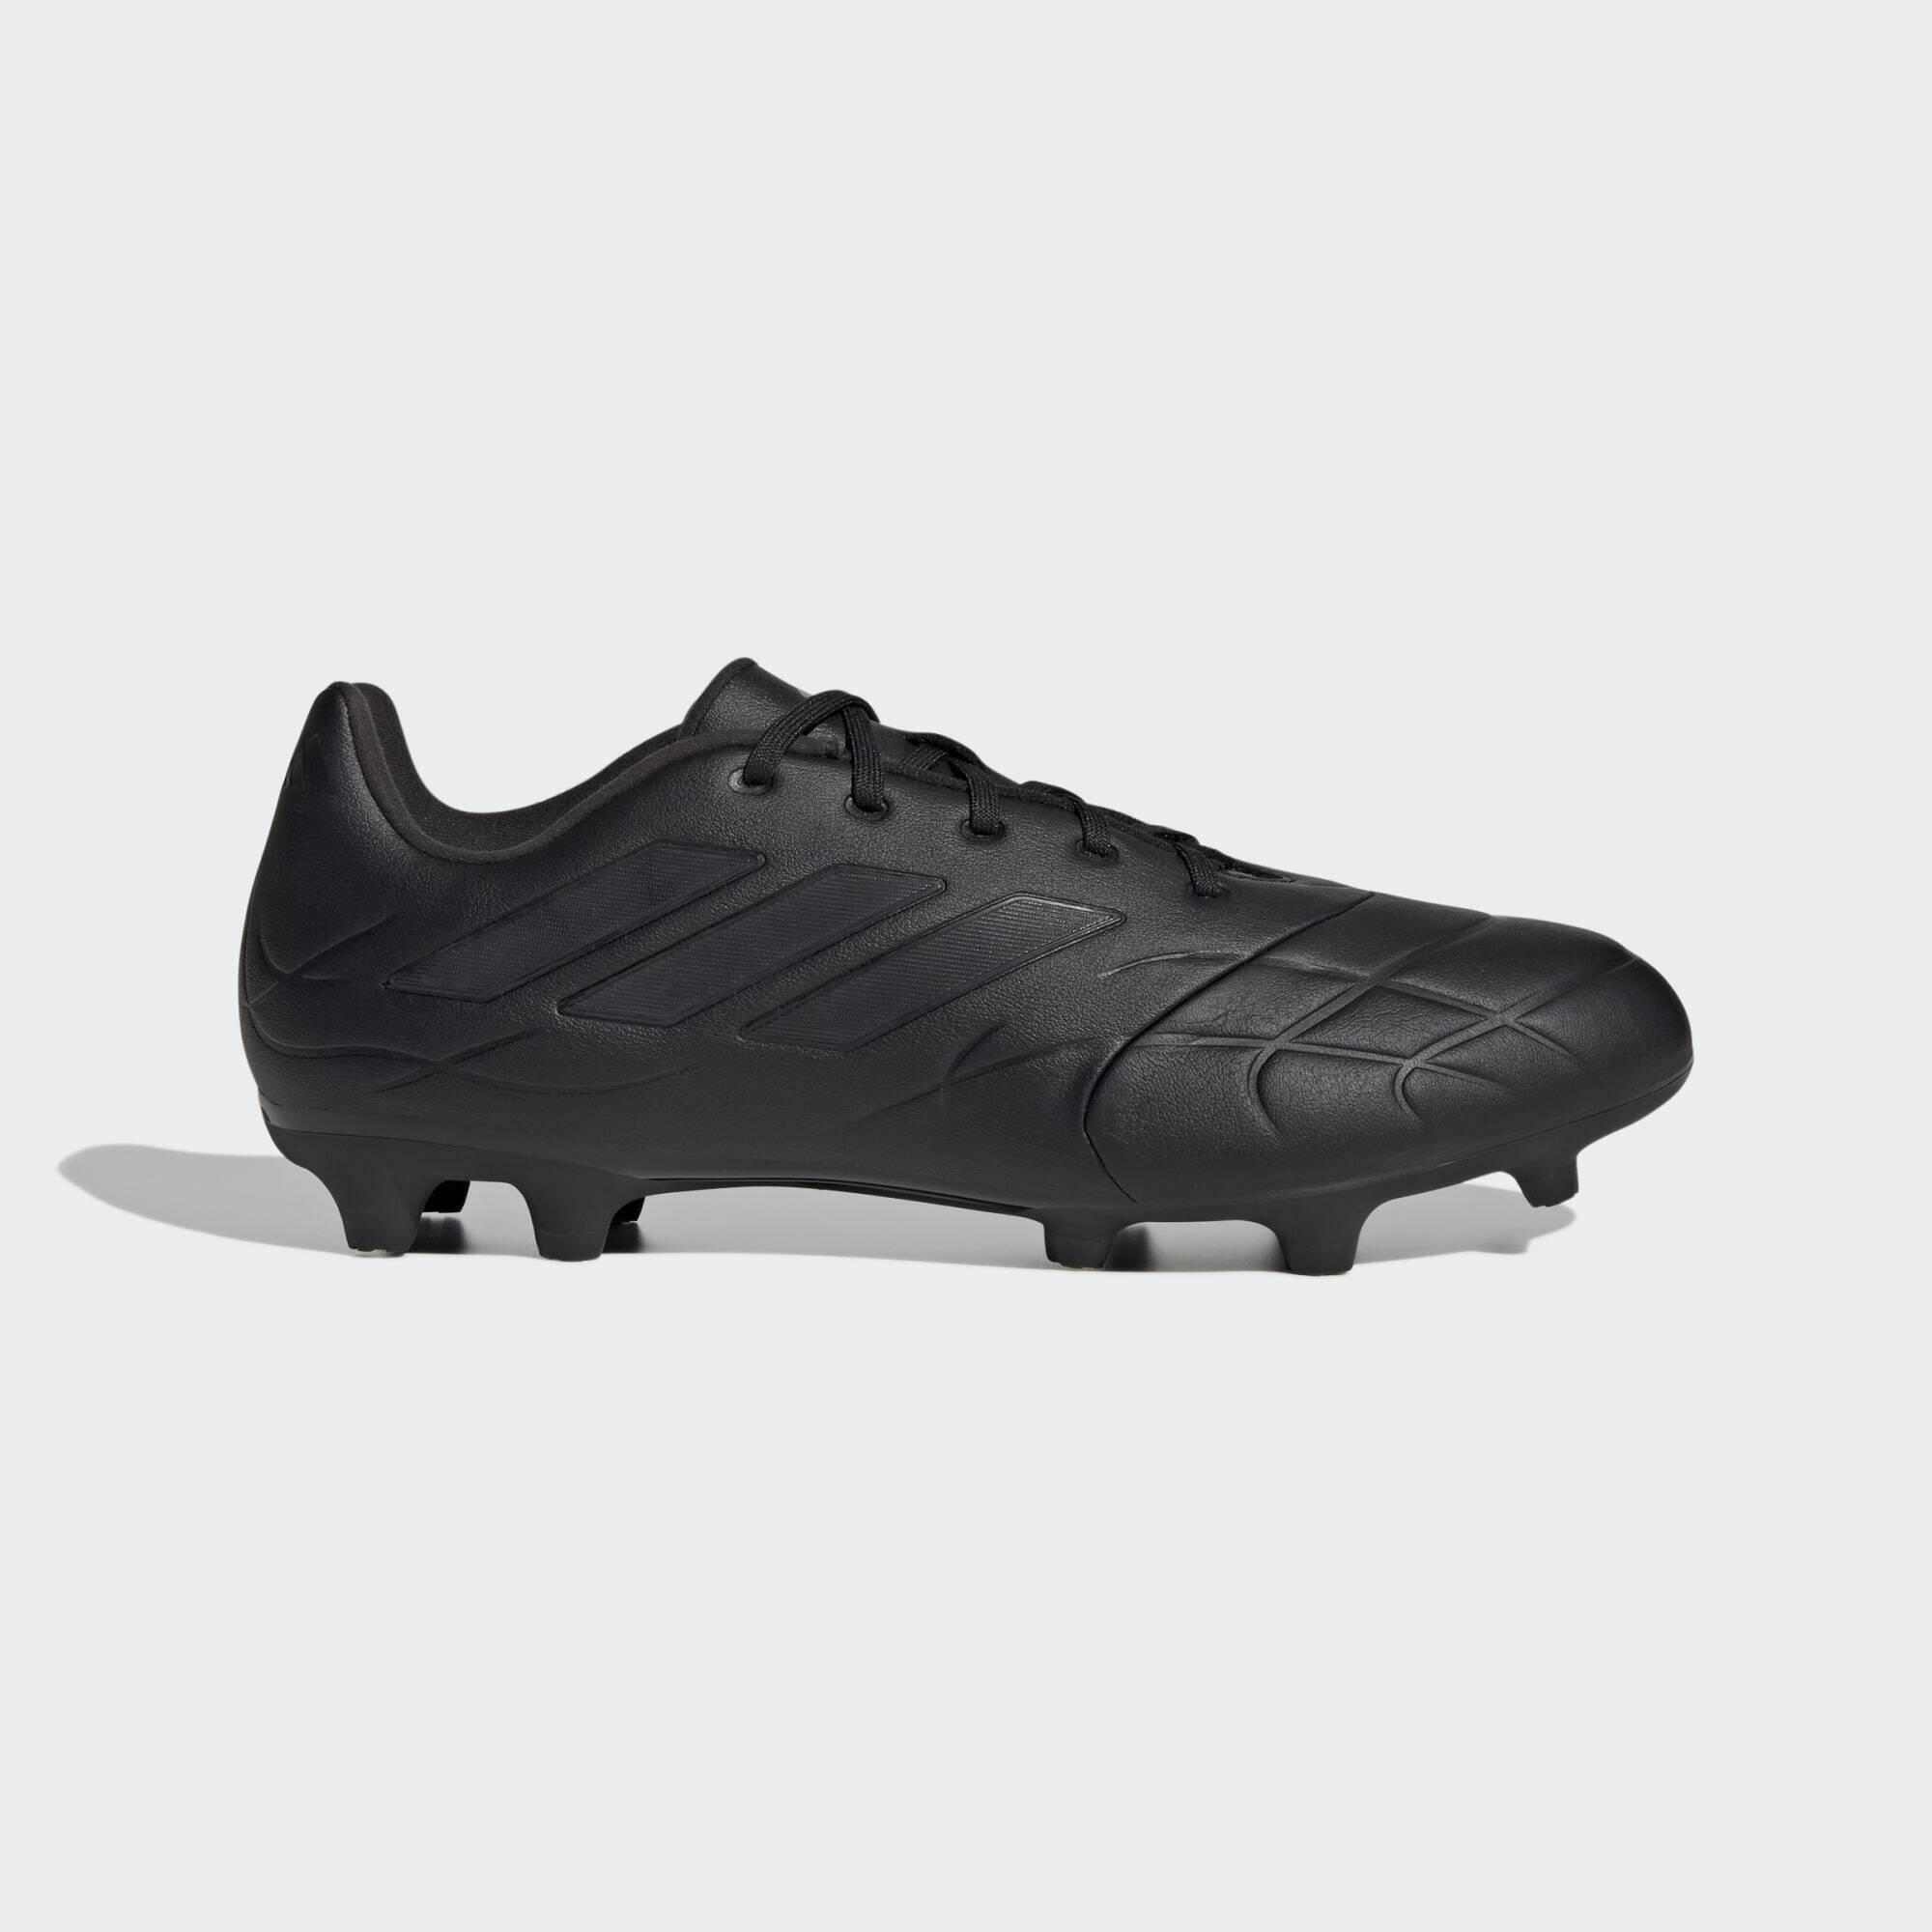 ADIDAS Copa Pure.3 Firm Ground Boots